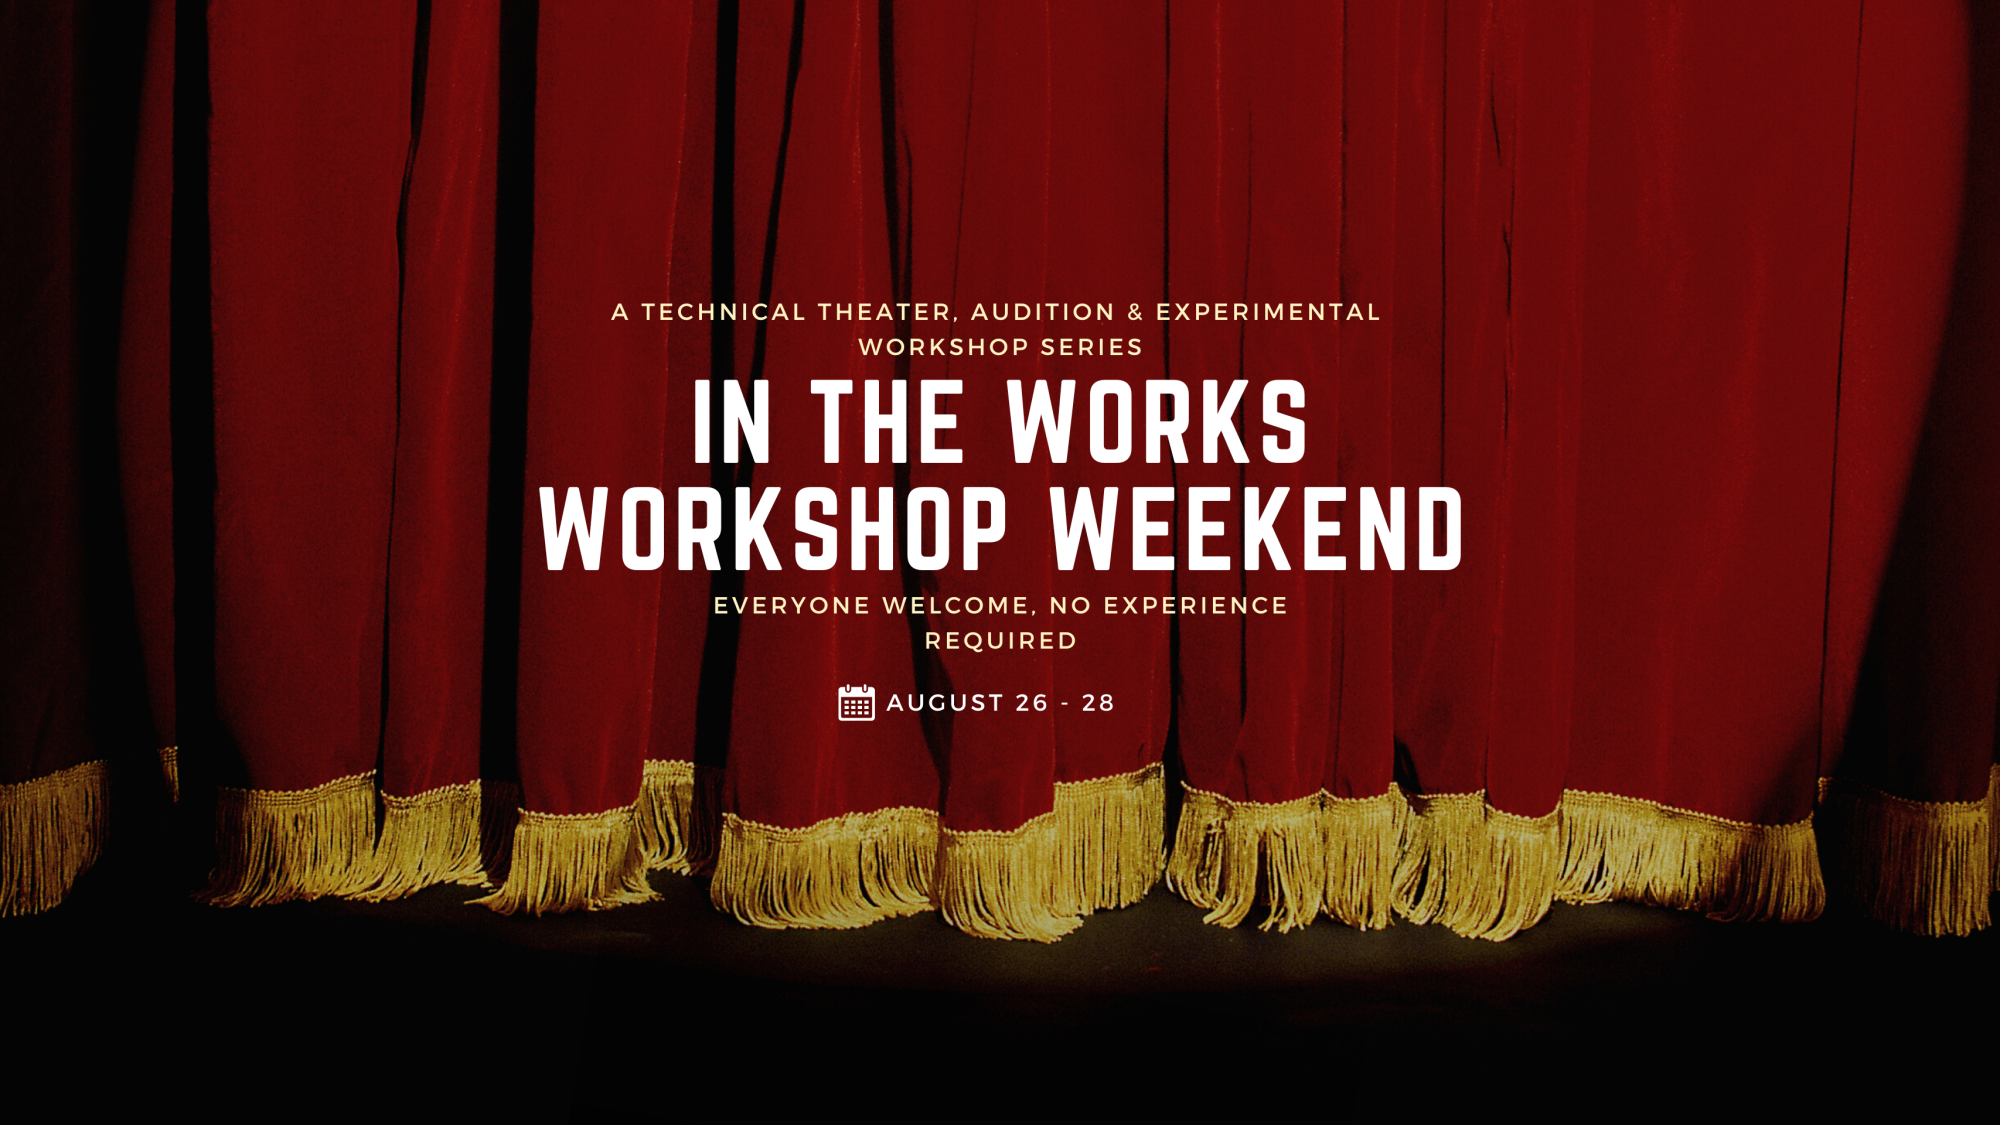 &quot;In the Works Workshop Weekend&quot; &quot;Everyone welcome, no experience required&quot; &quot;August 26 - 28&quot; Over an image of a theater curtain.